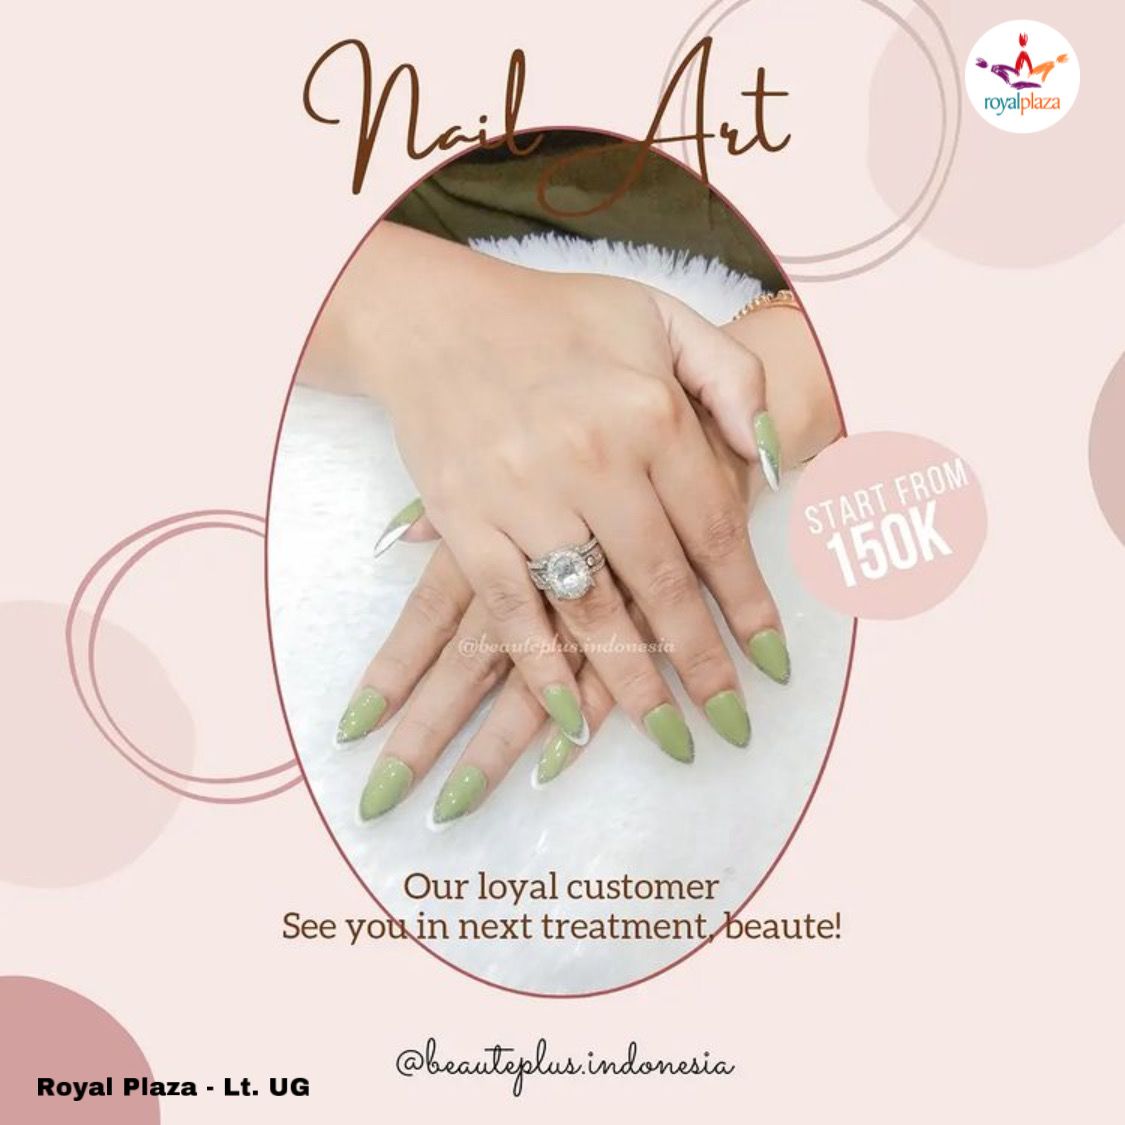 On picture Nail Art treatments